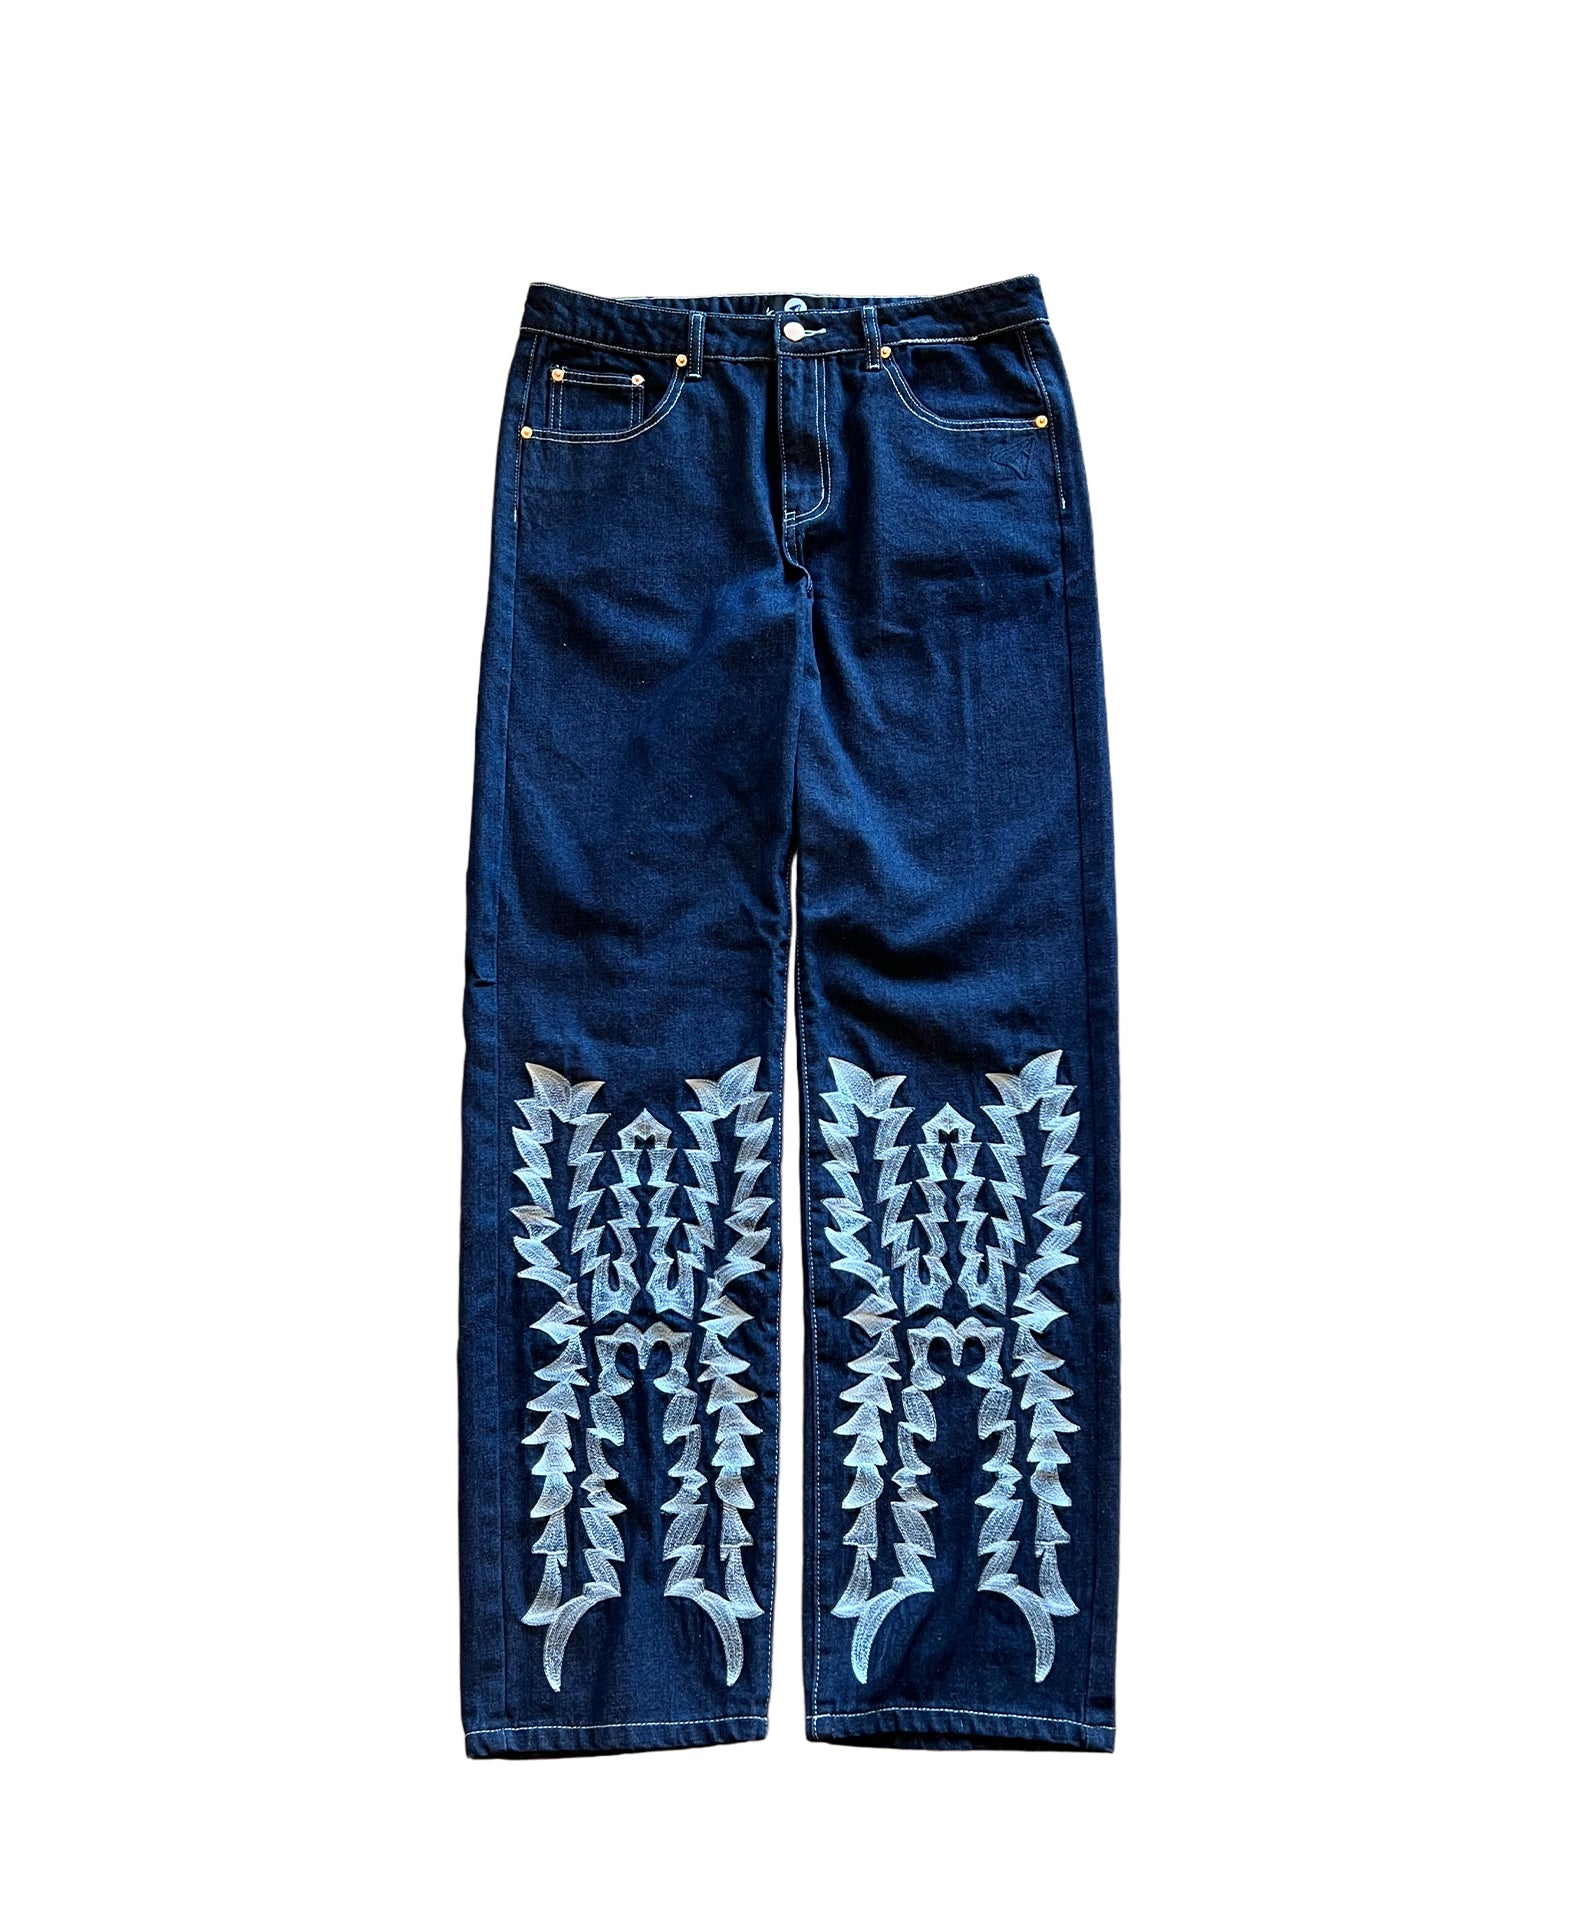 Thorn jeans - Navy